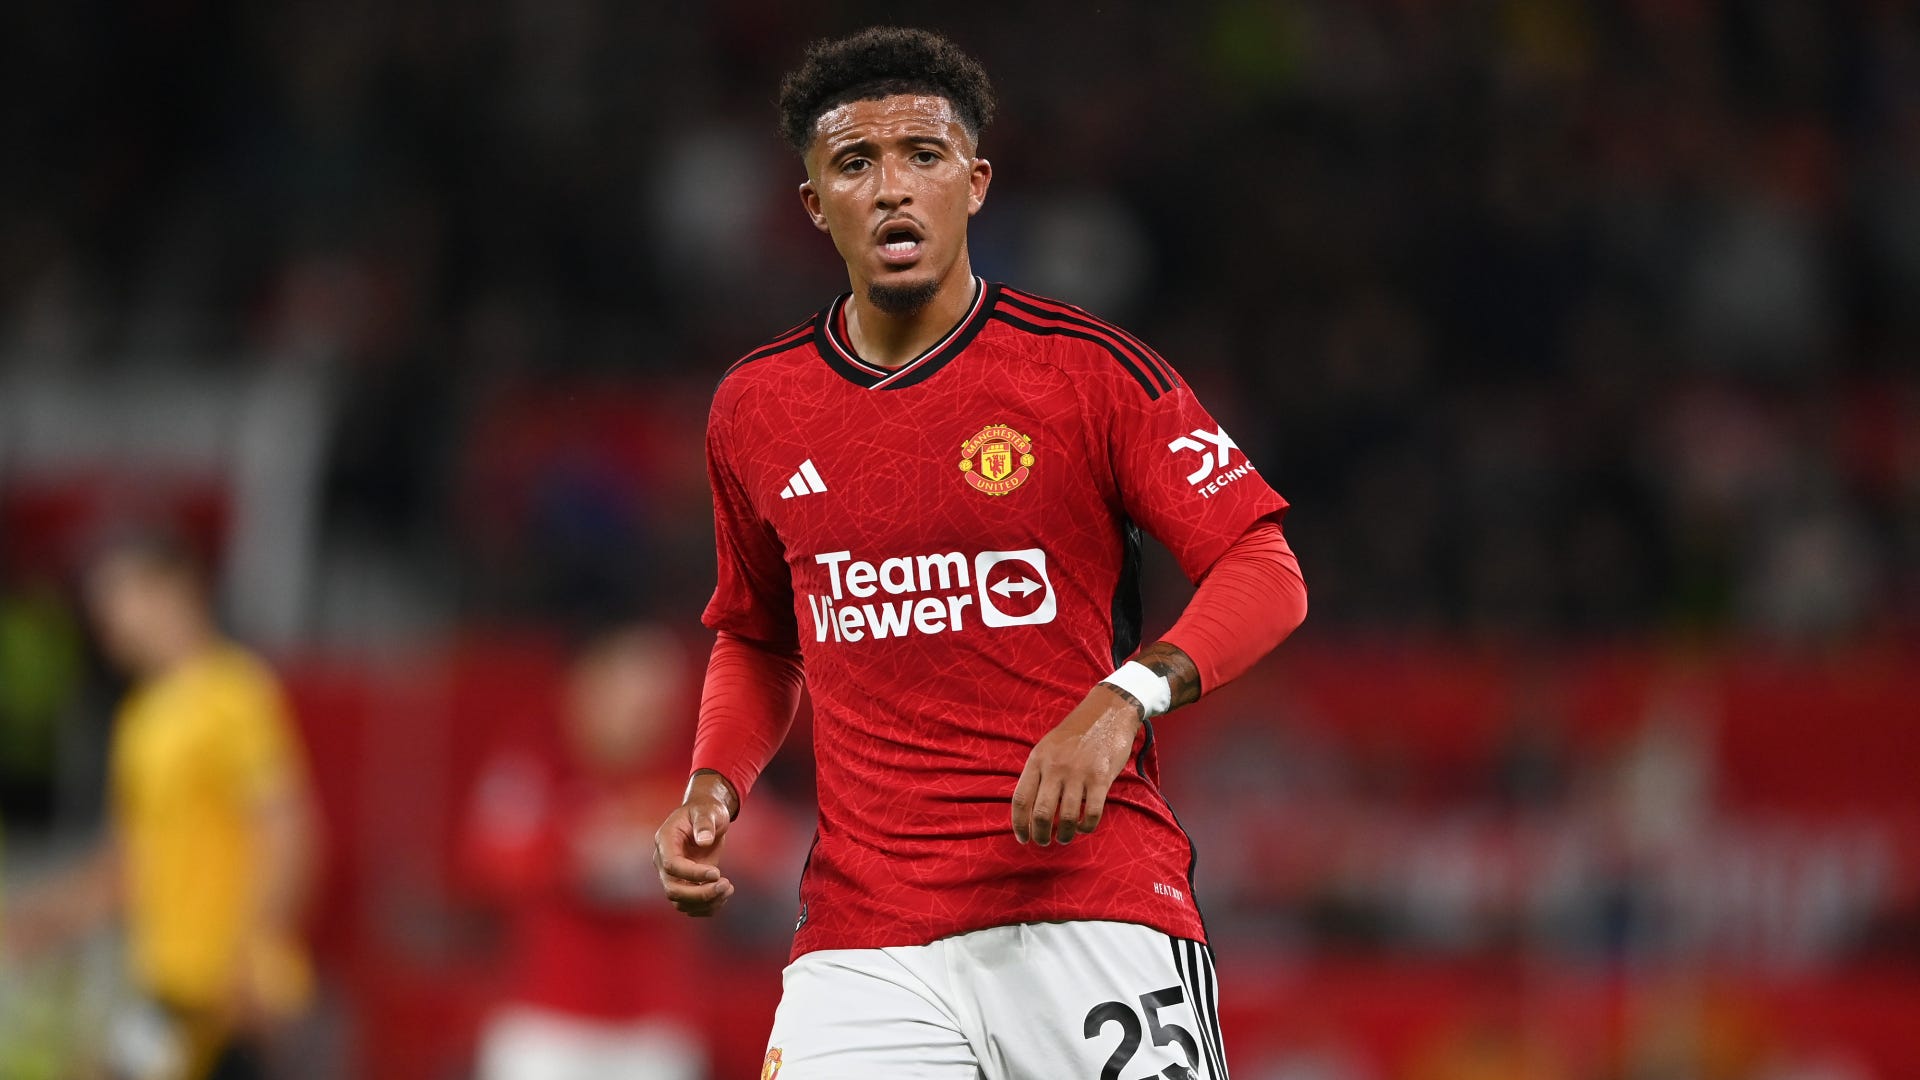 'Show some sort of humility' - Jadon Sancho offered advice on how to rescue his Man Utd career by club legend Roy Keane